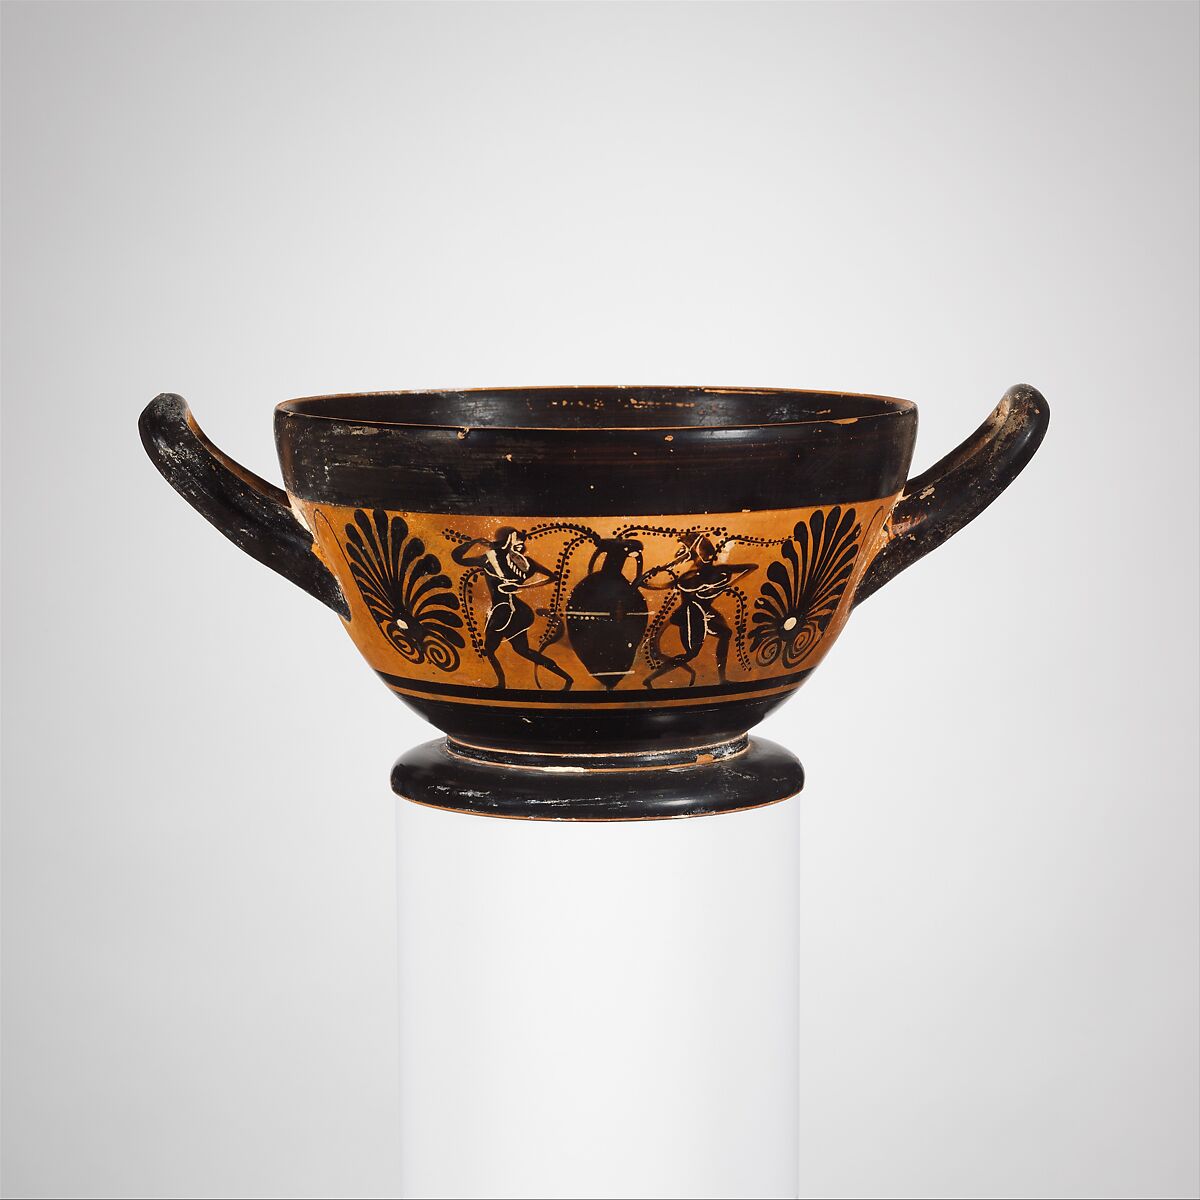 Terracotta skyphos (deep drinking cup), Attributed to the manner of the Haimon Painter, Terracotta, Greek, Attic 